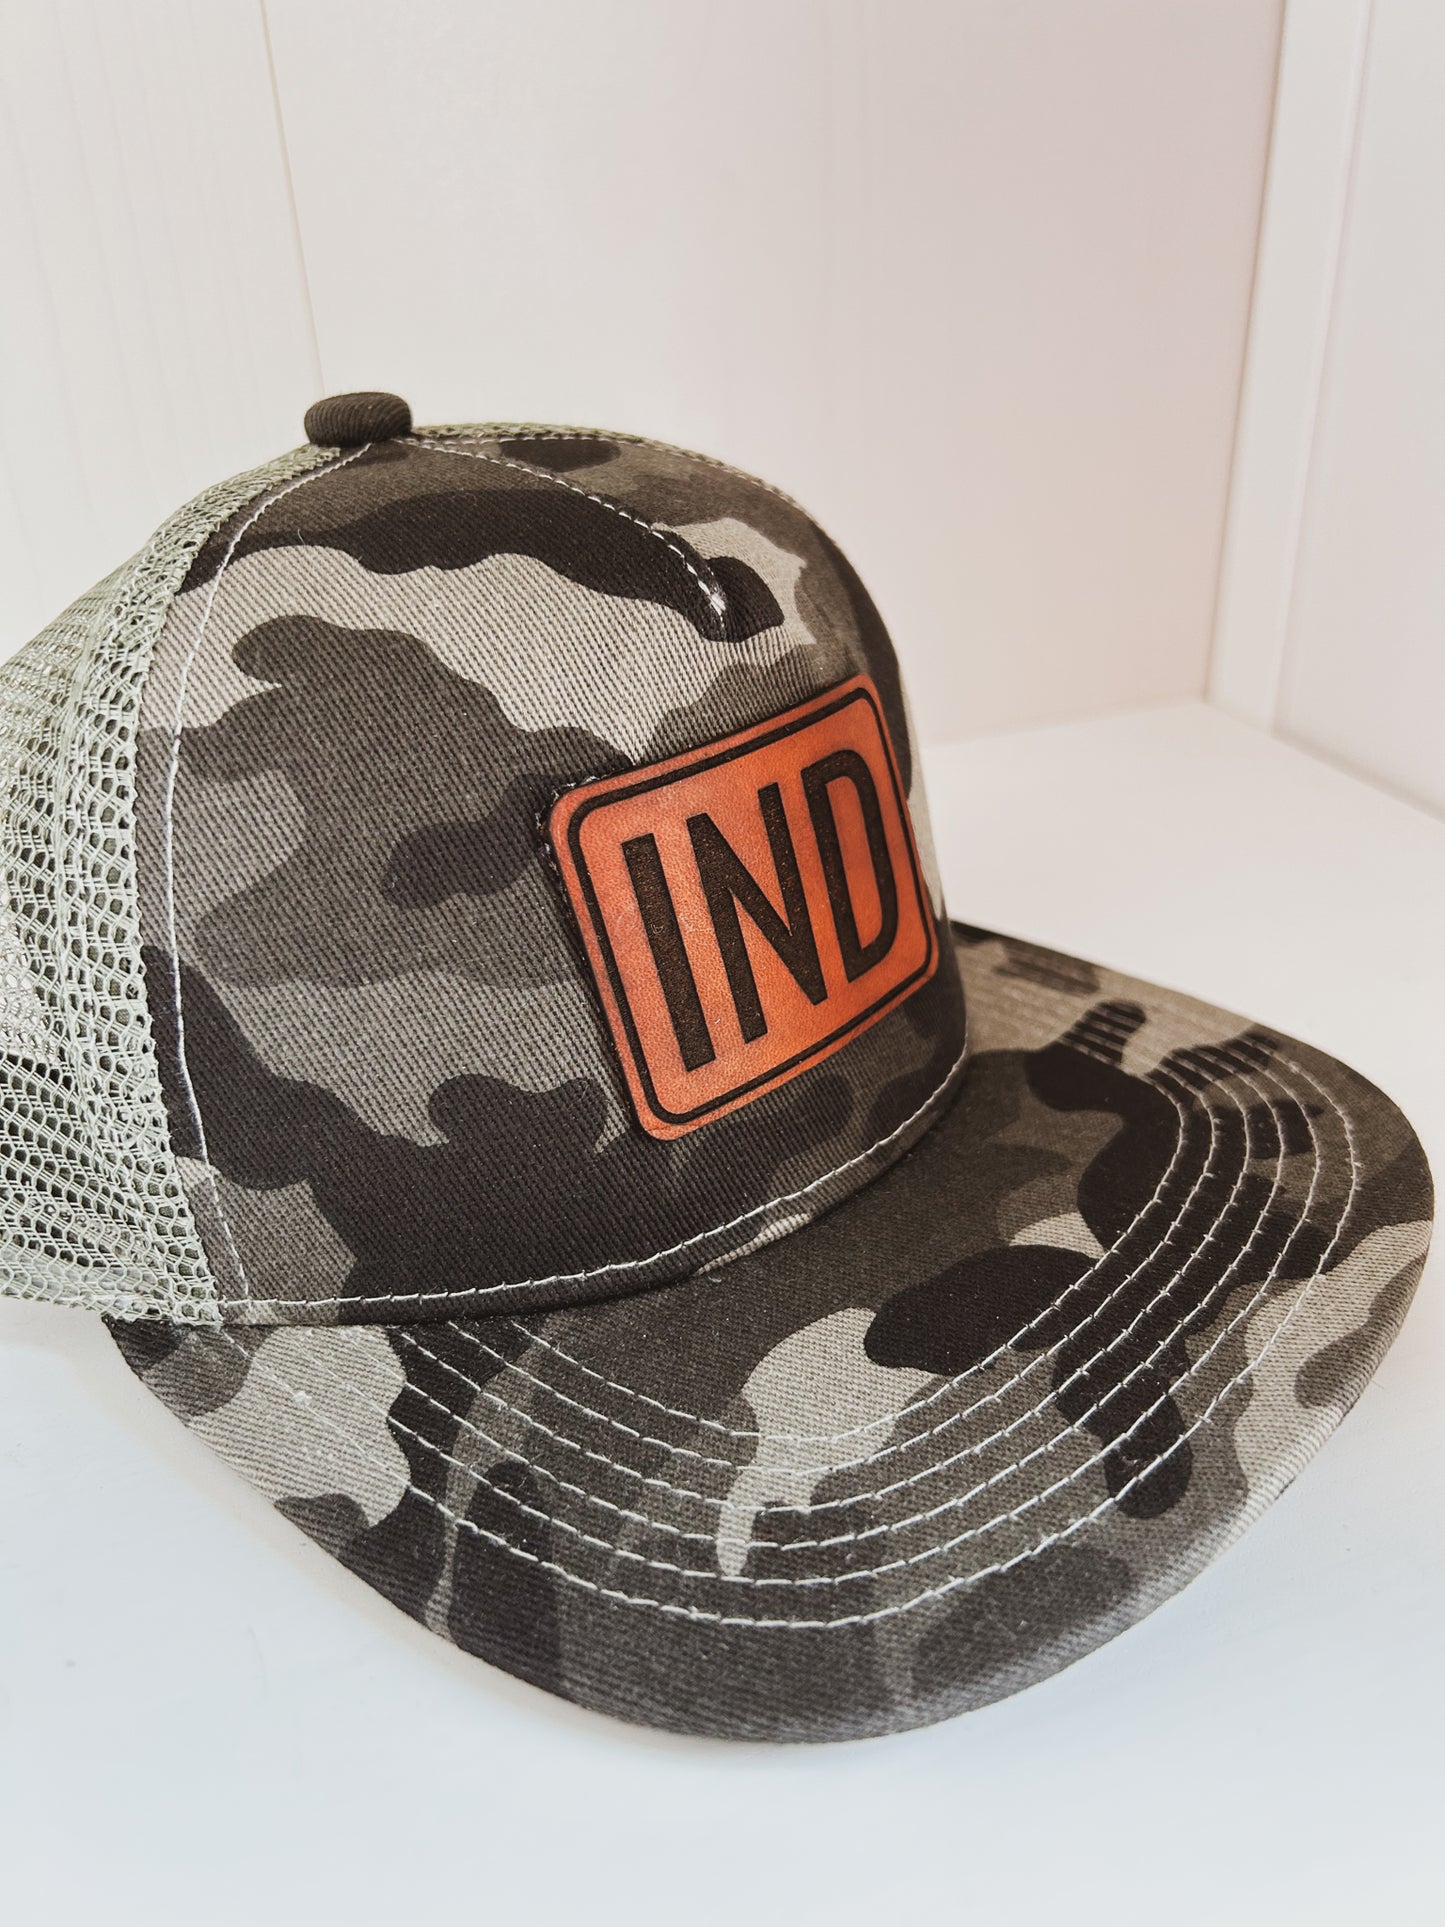 IND Leather Patch on Gray Camo Trucker Hat - Kids